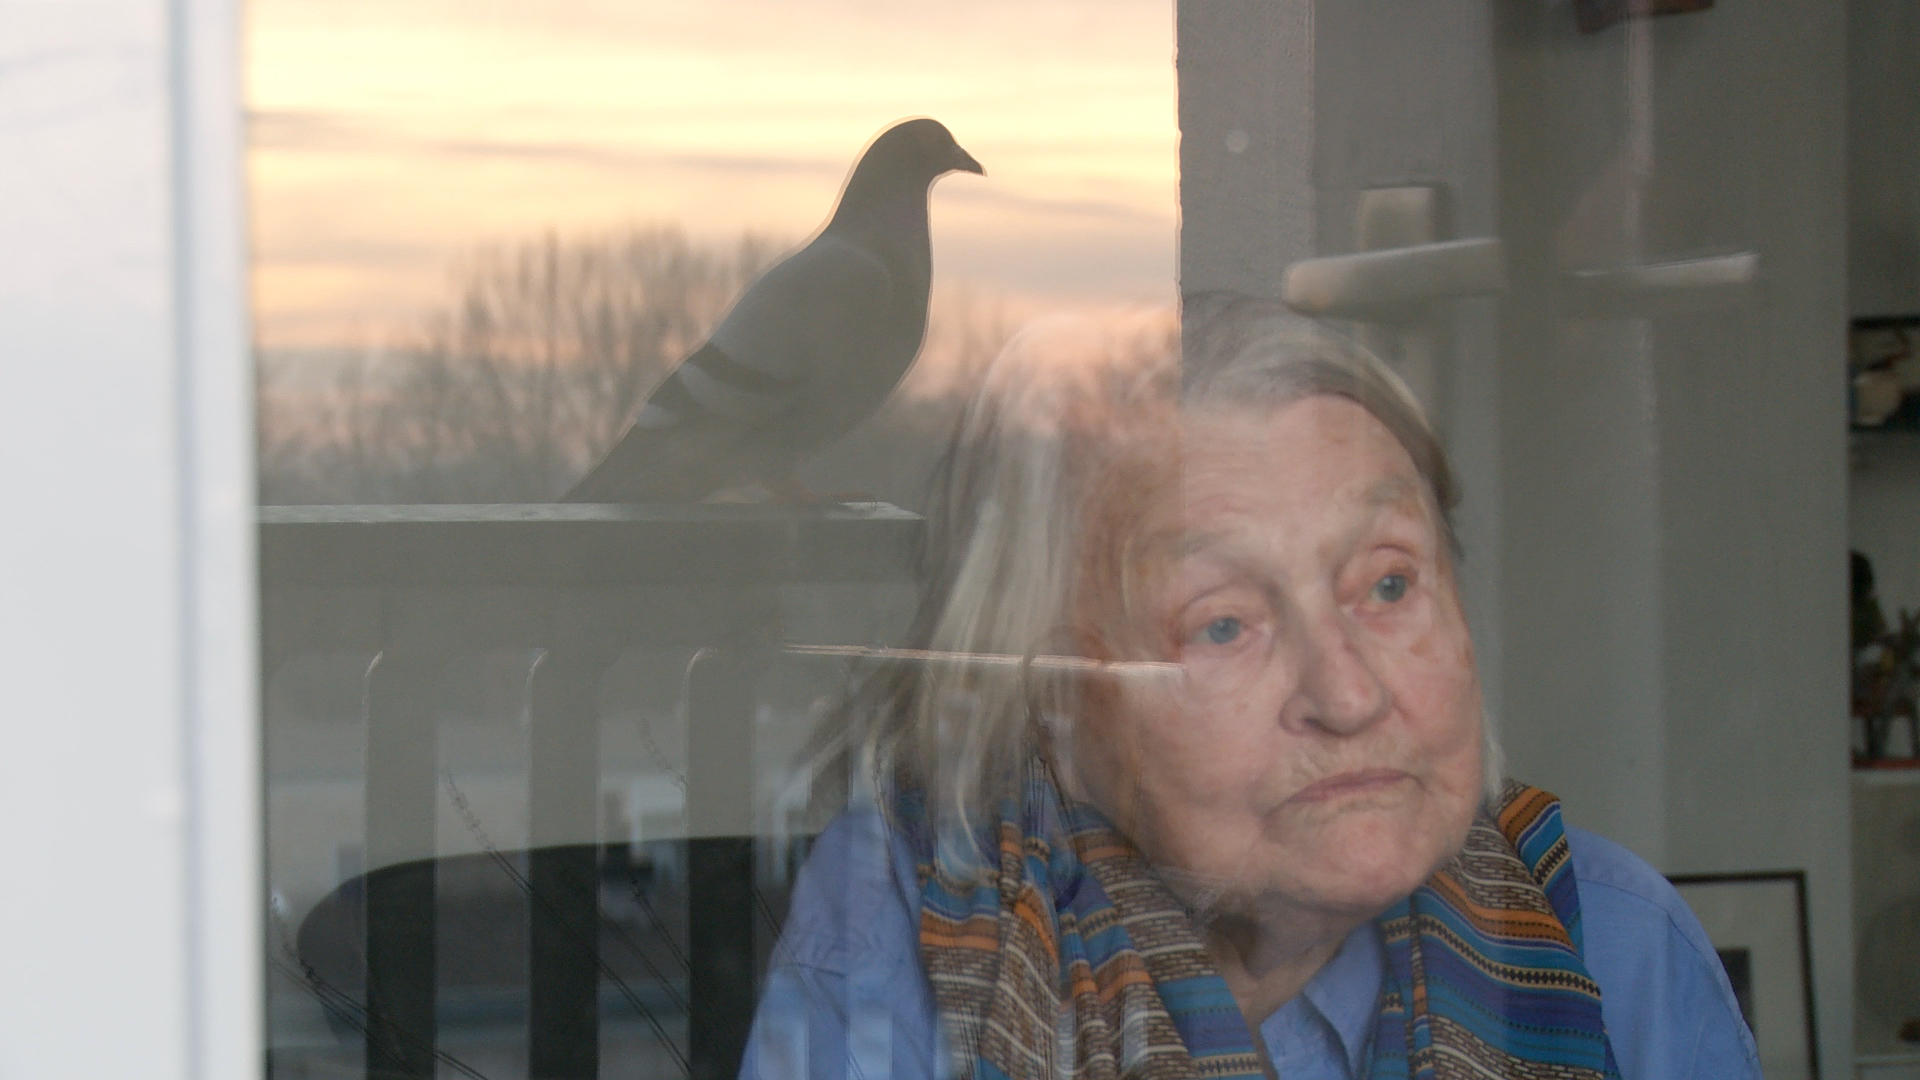 Still from the film Een klein beetje nog. Elisabeth is sitting in front of her window. The reflection of a pigeon is seen in the window.